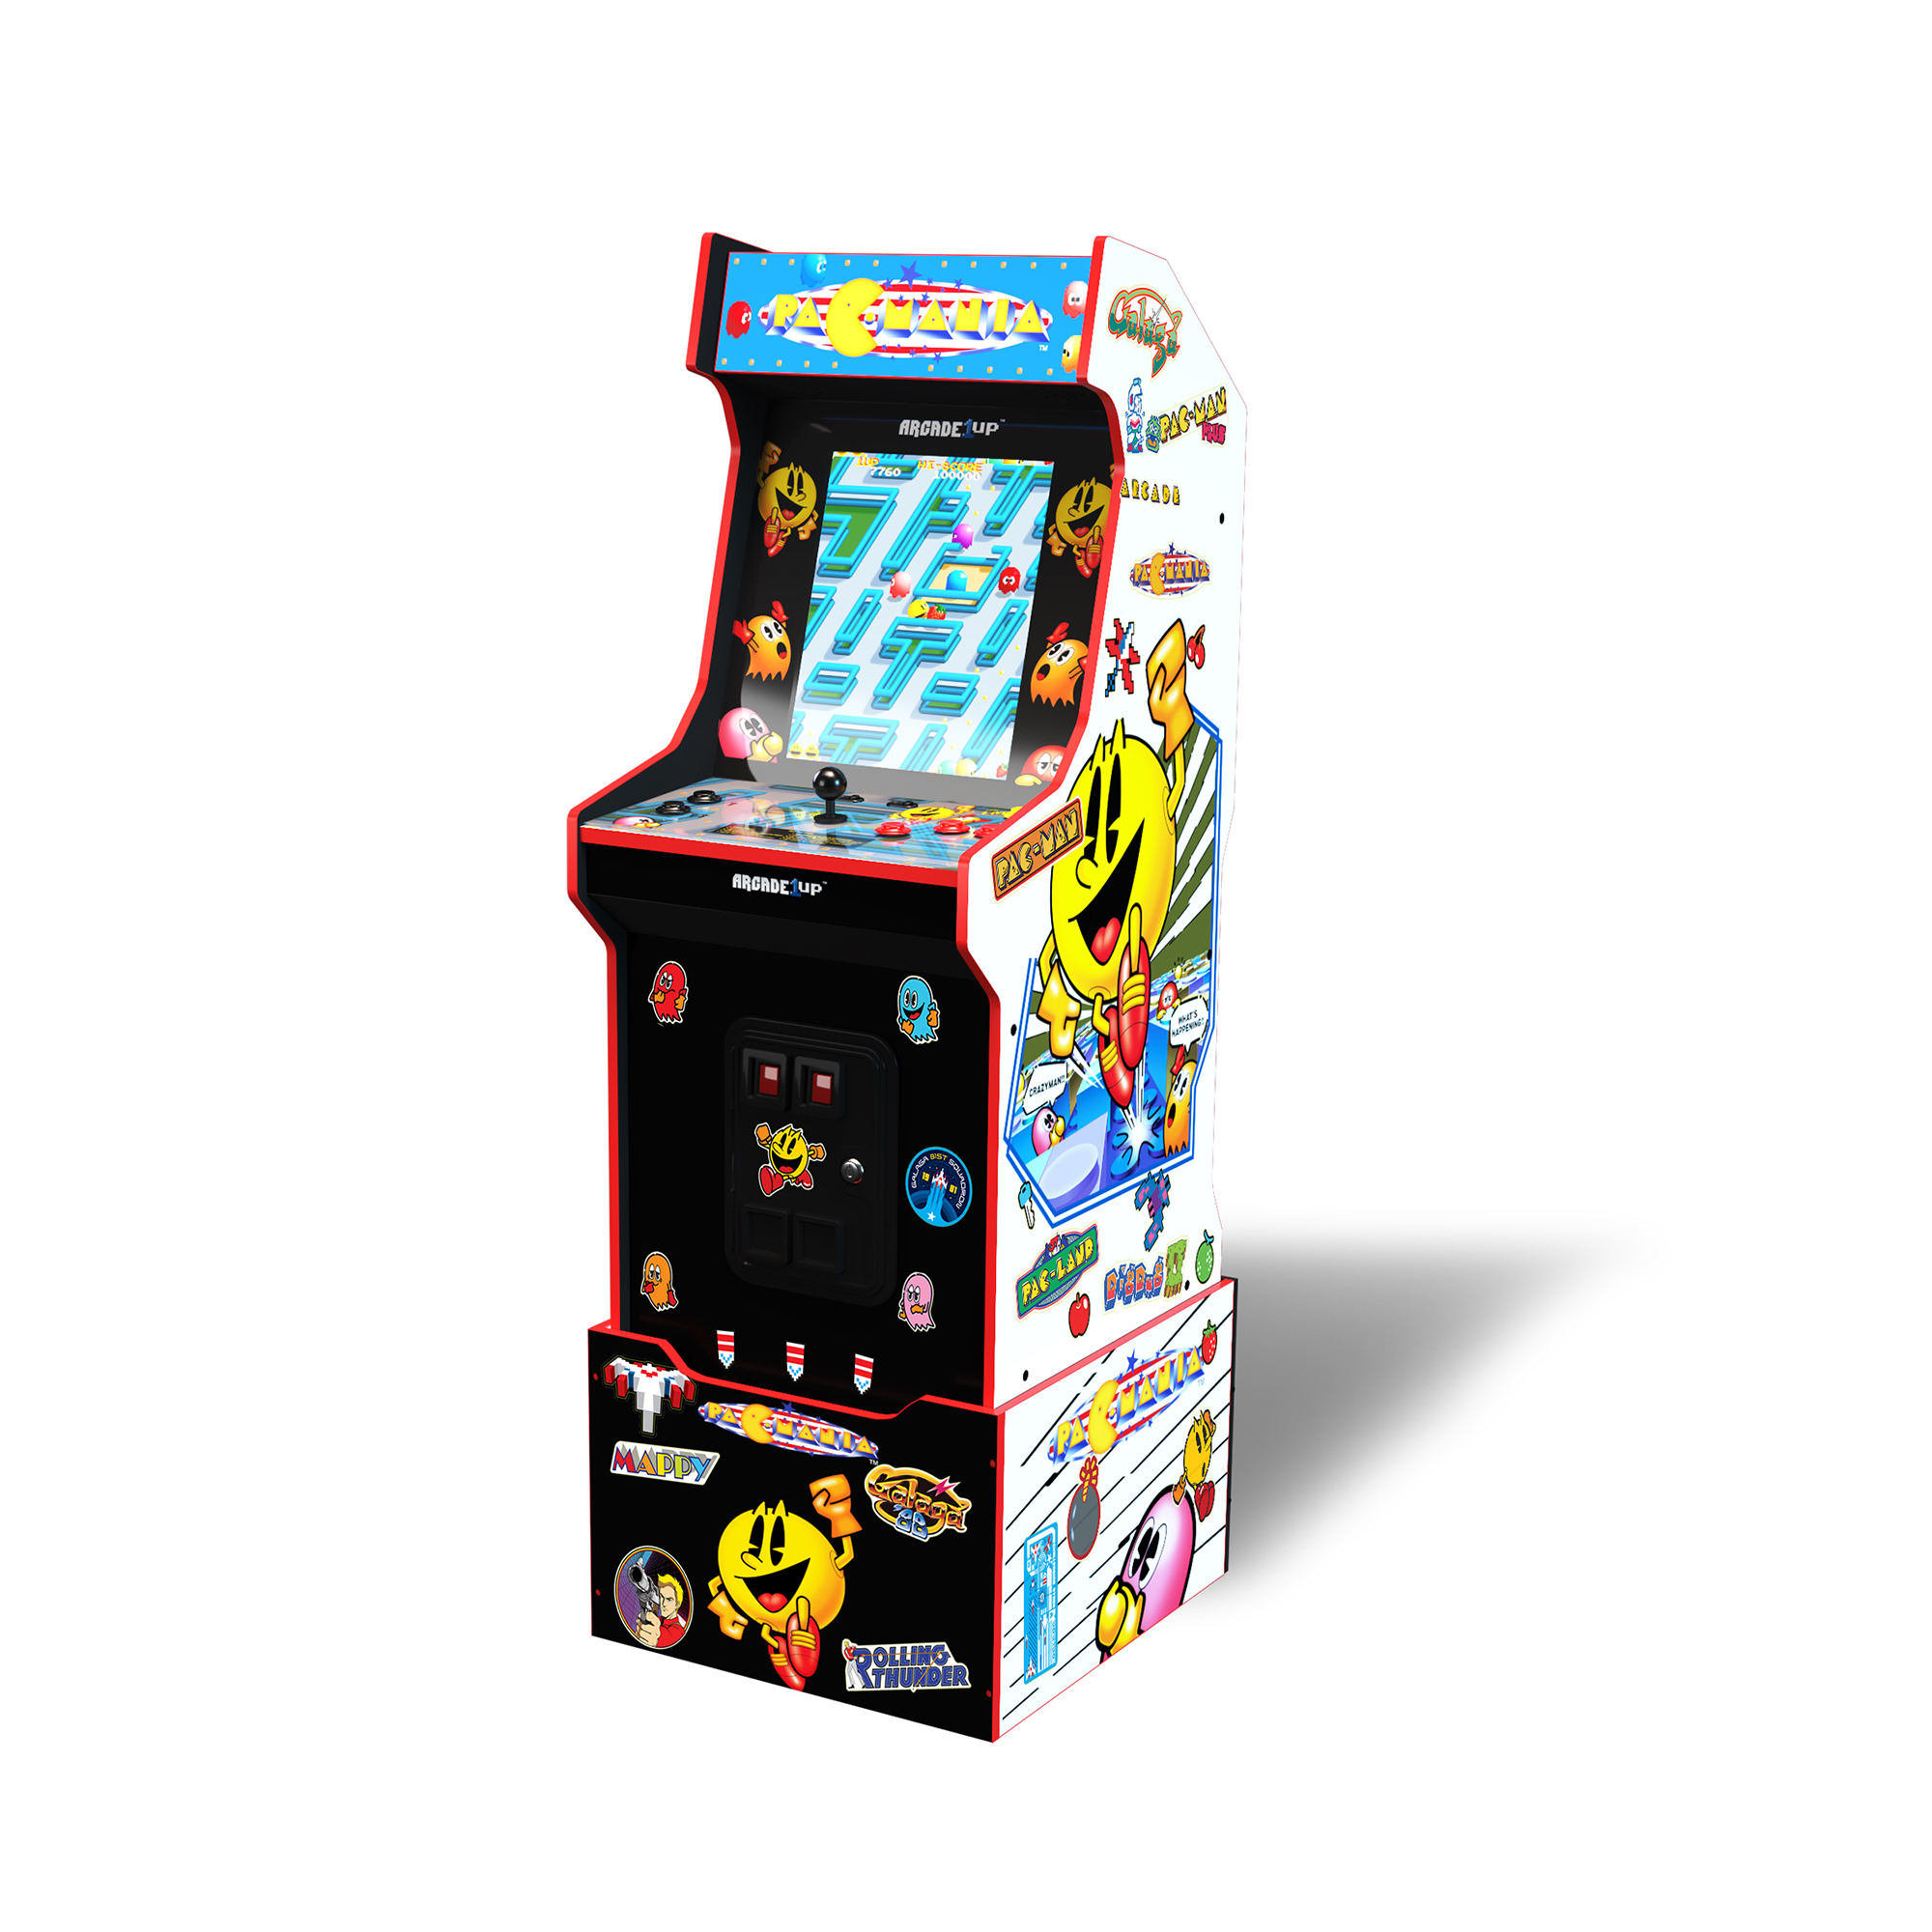 Arcade1UP - 14 Games in 1, PAC-MAN Customizable Video Game Arcade Featuring PAC-MANIA and includes 100 Bonus Stickers - image 1 of 17